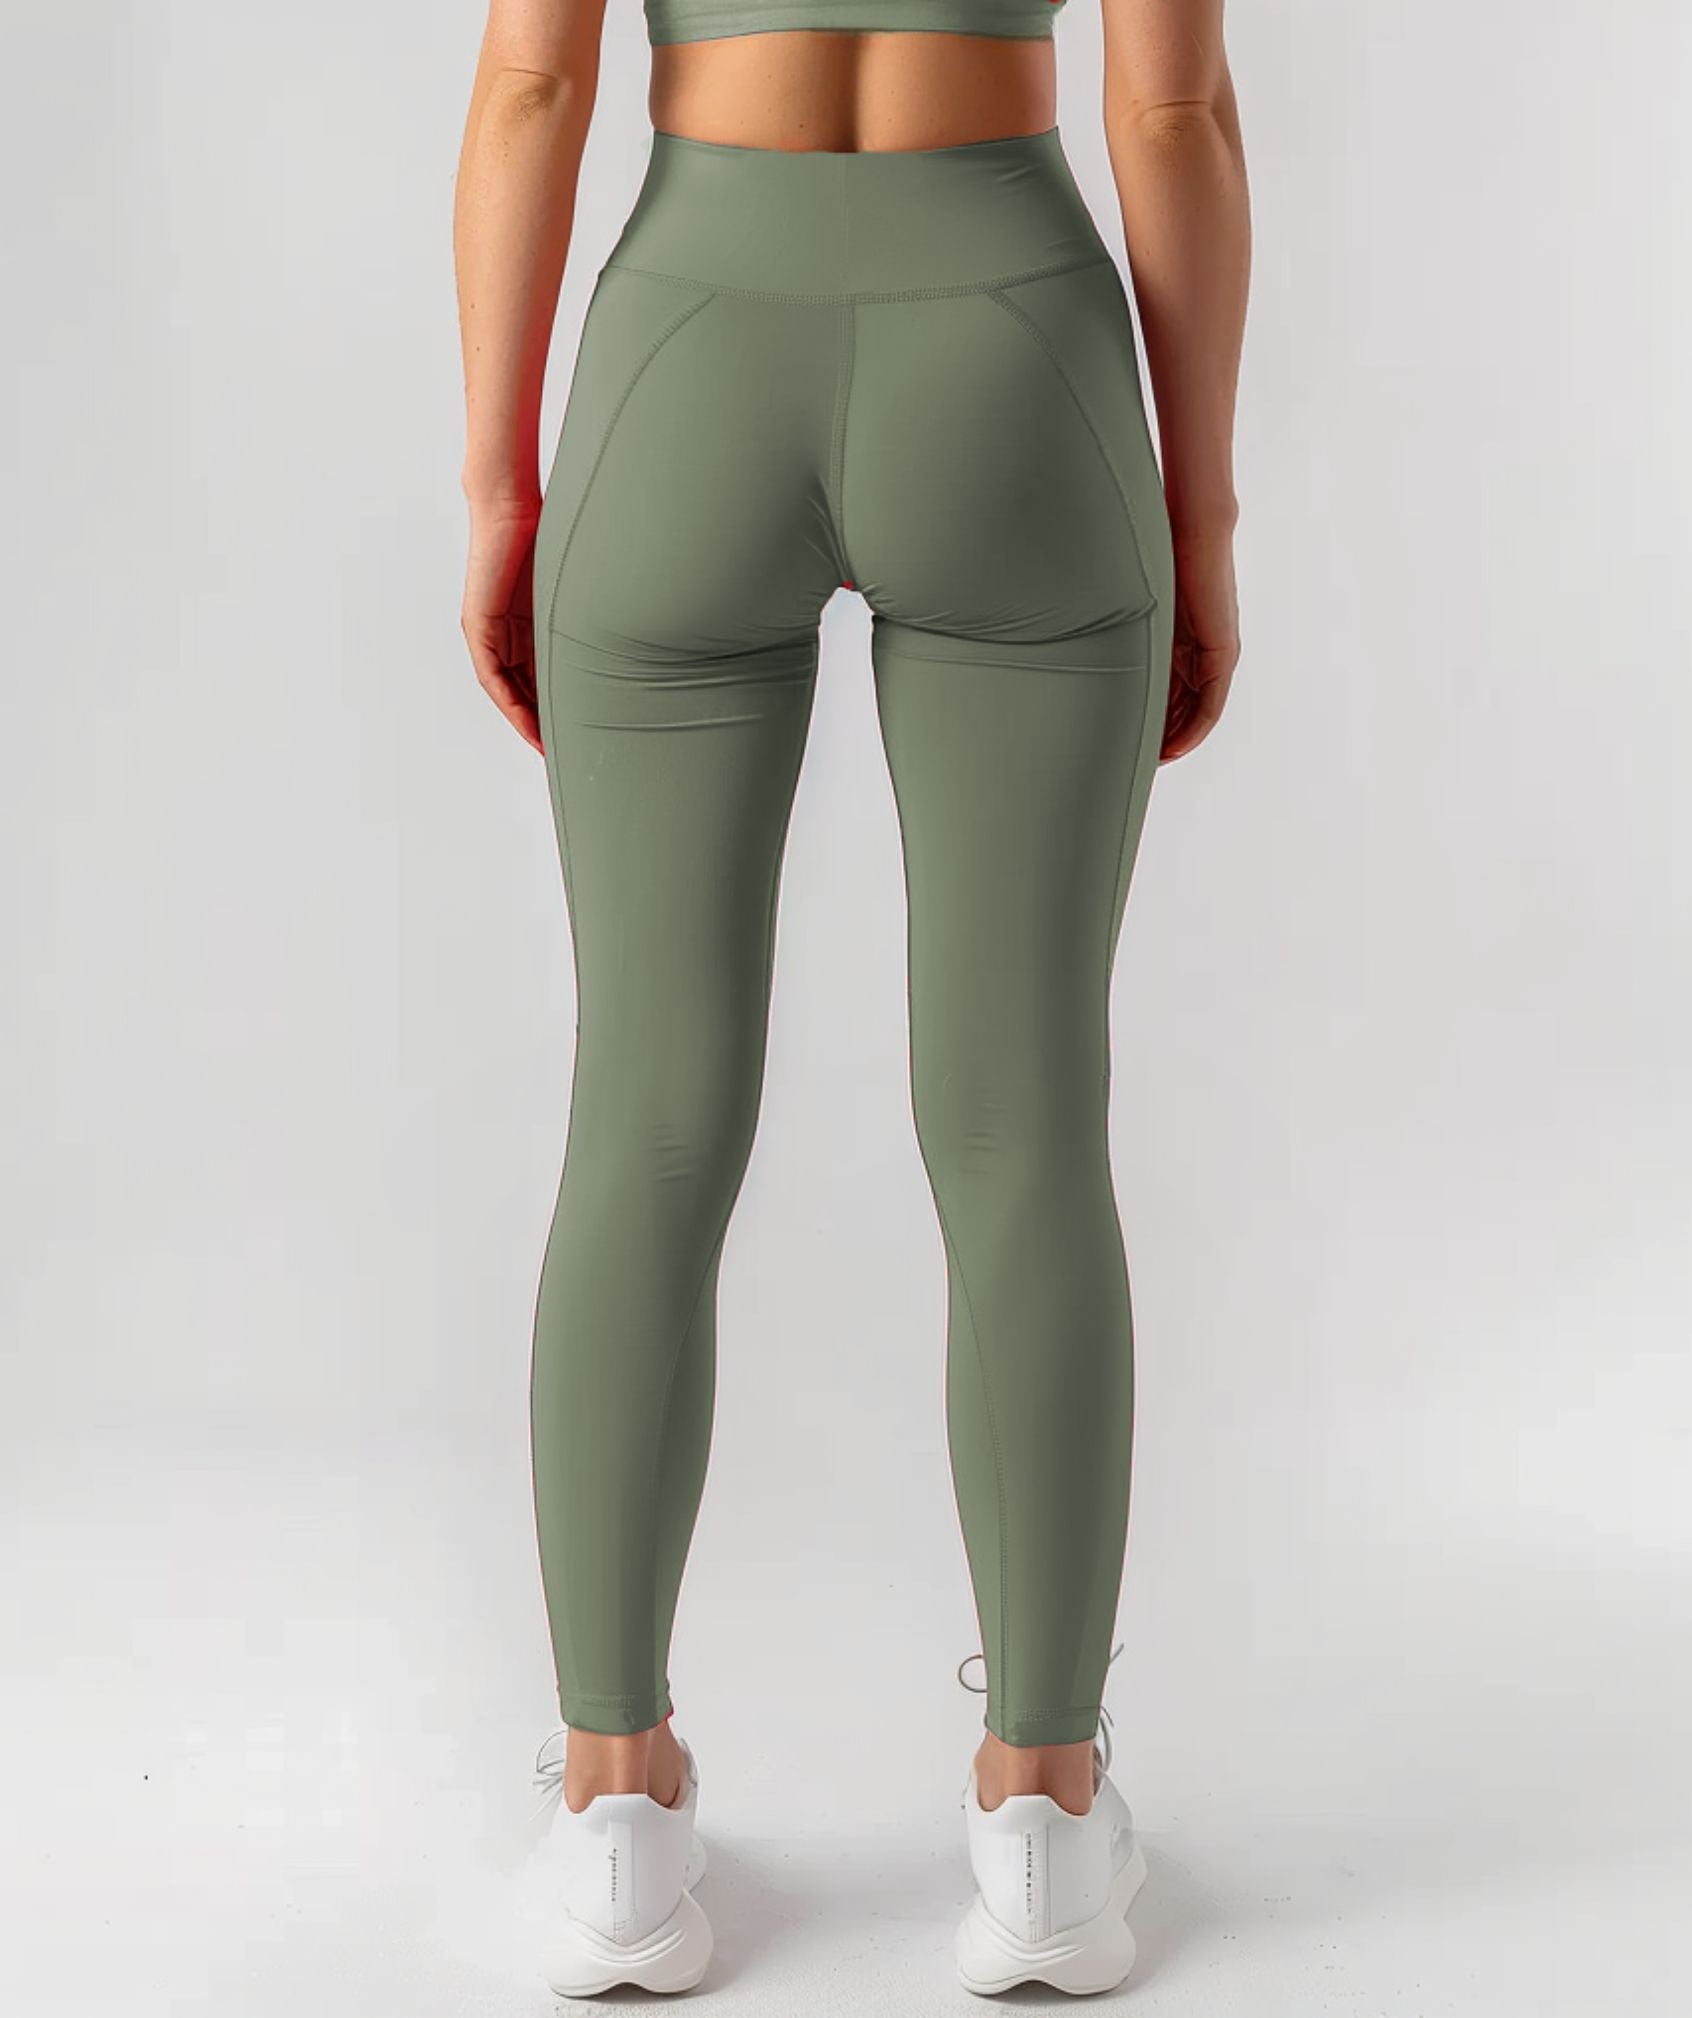 Apex™ army green Harmony Leggings back view - sustainable activewear